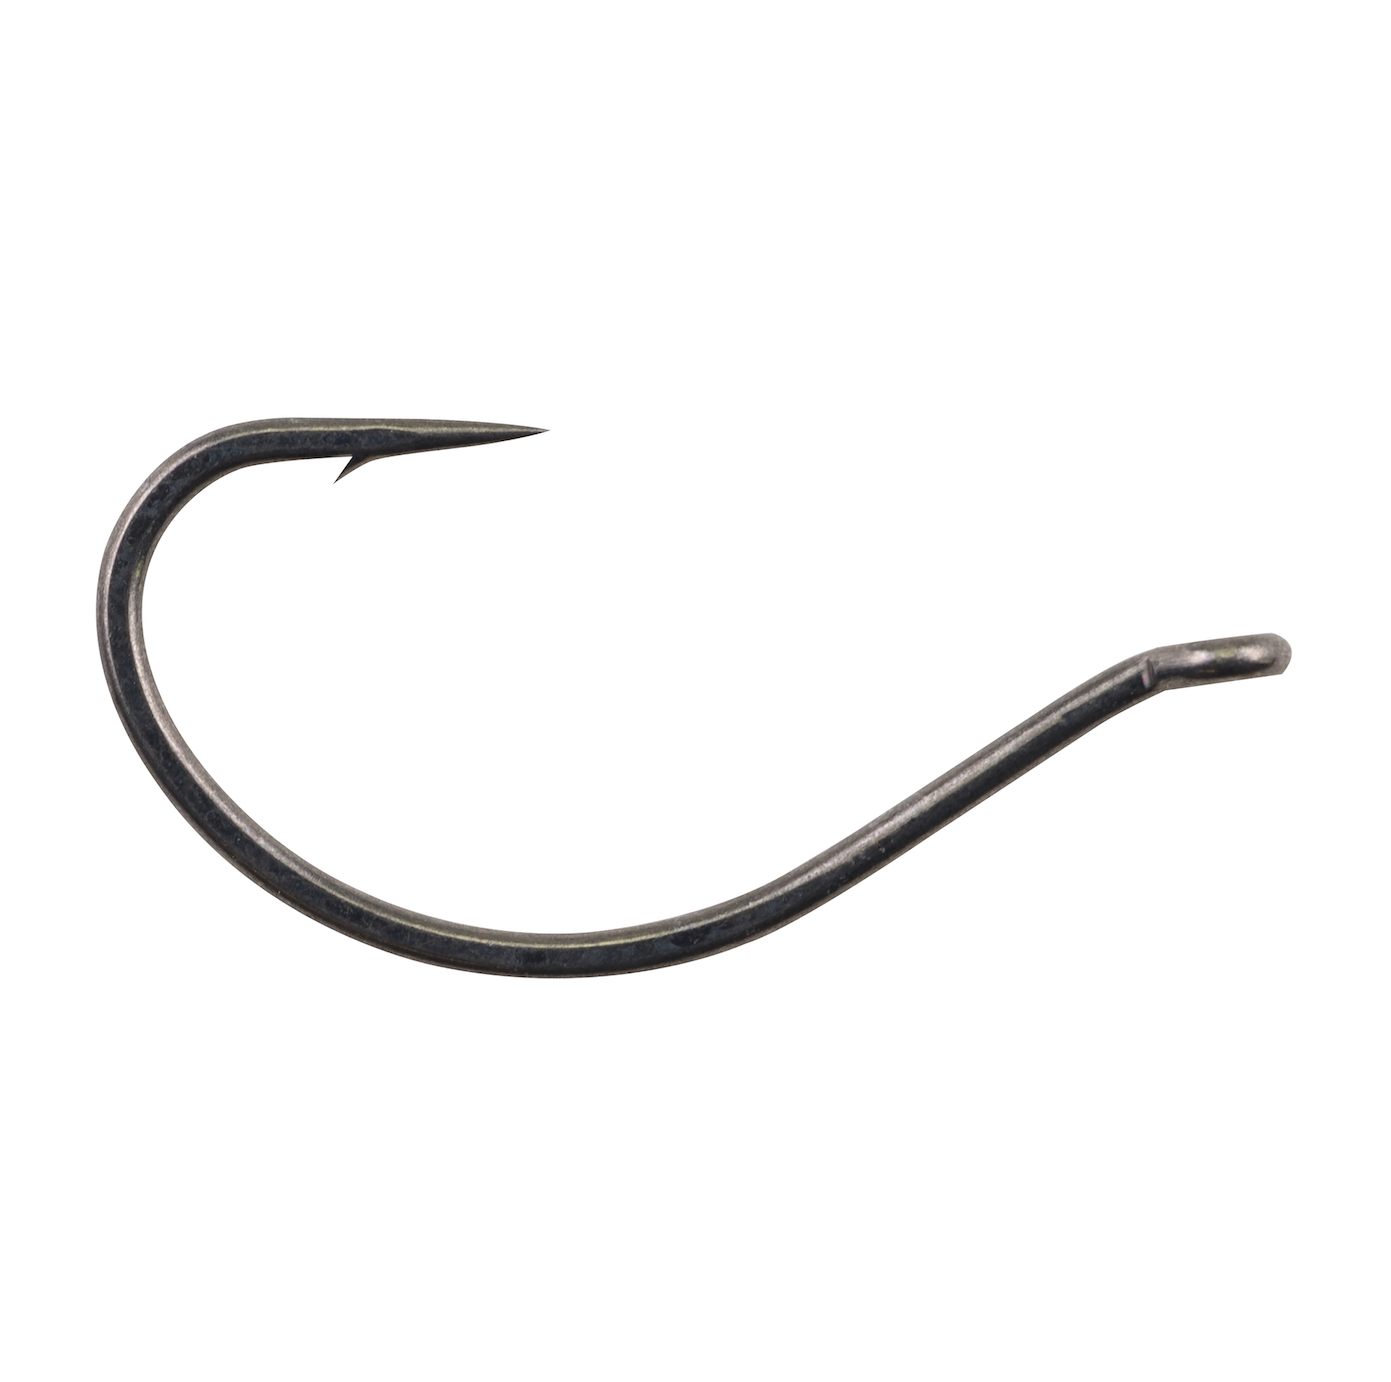 The Drop Shot hook is designed for suspended drop shot presentations and can also be used for other applications such as livebait. Eight hooks per package at $3.99.